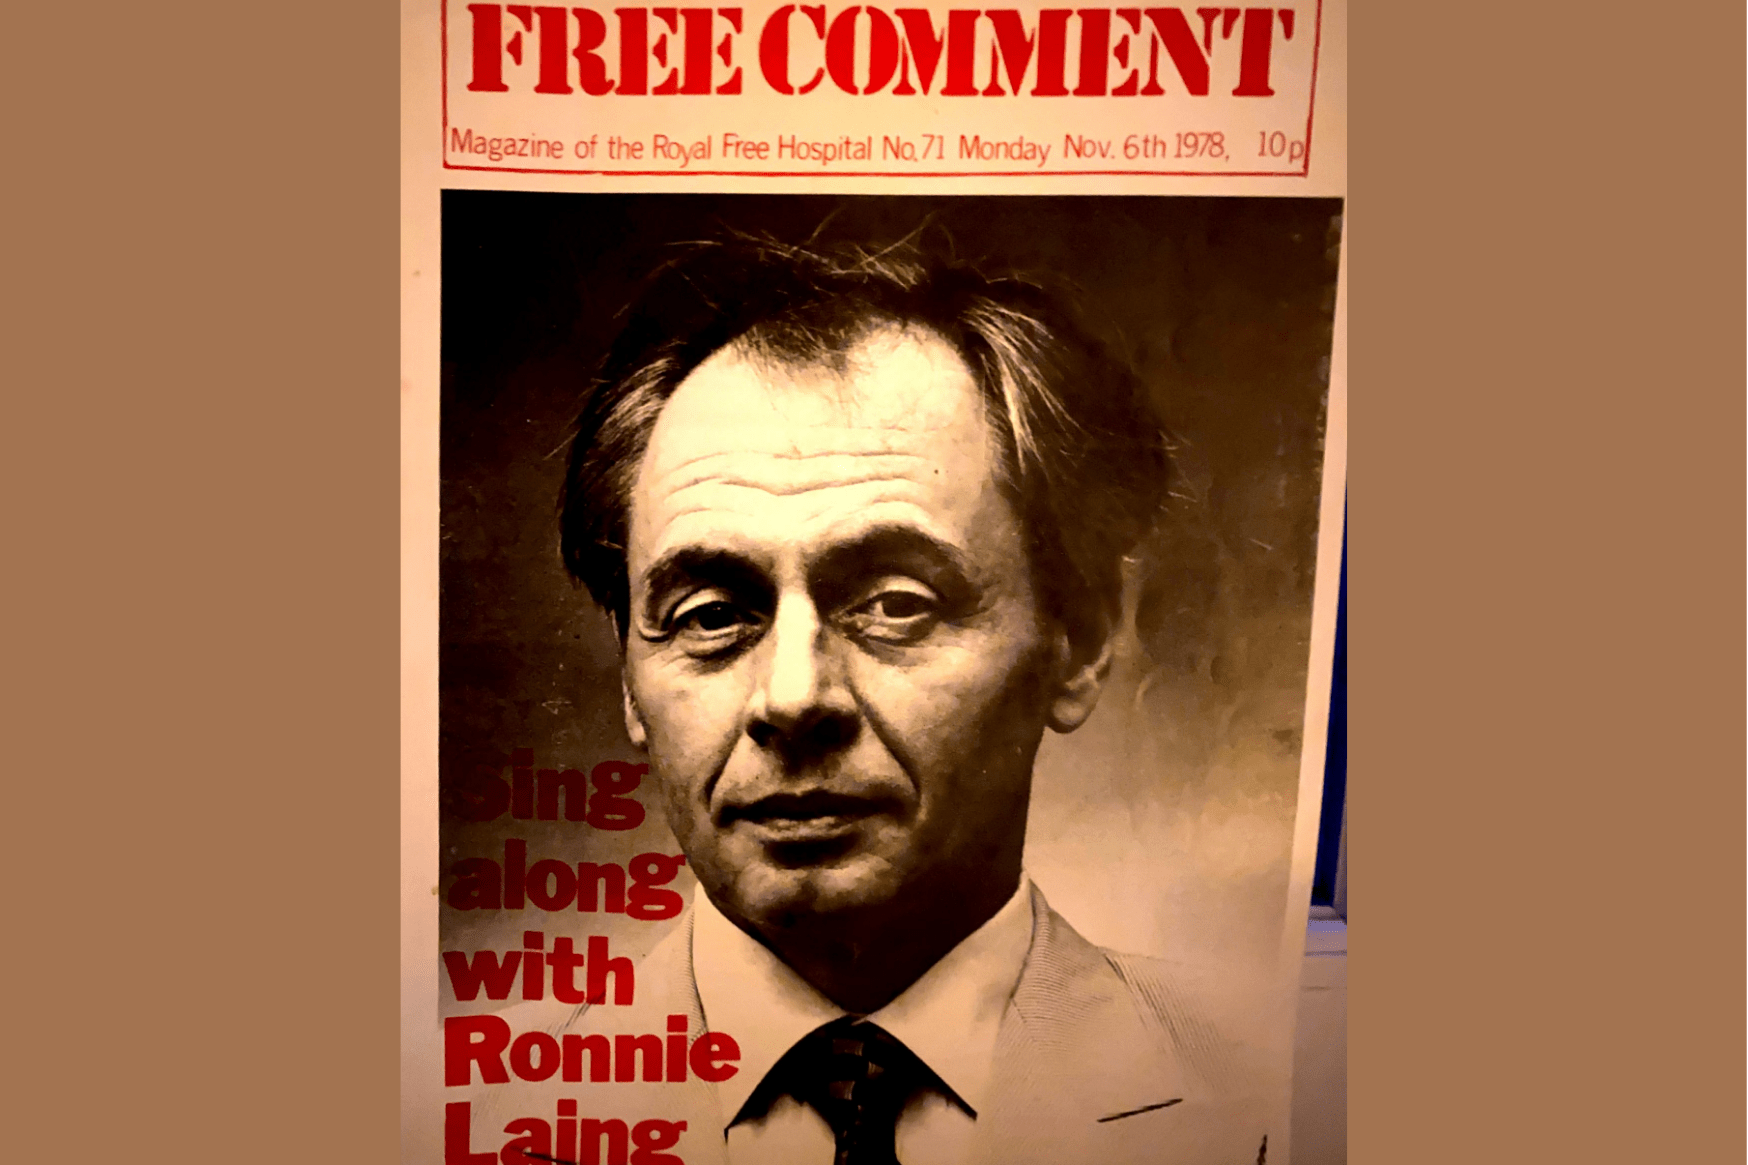 The front cover of the 'Free Comment' student magazine, featuring a picture of psychiatrist RD Laing. The title is 'Sing along with Ronnie Laing'.